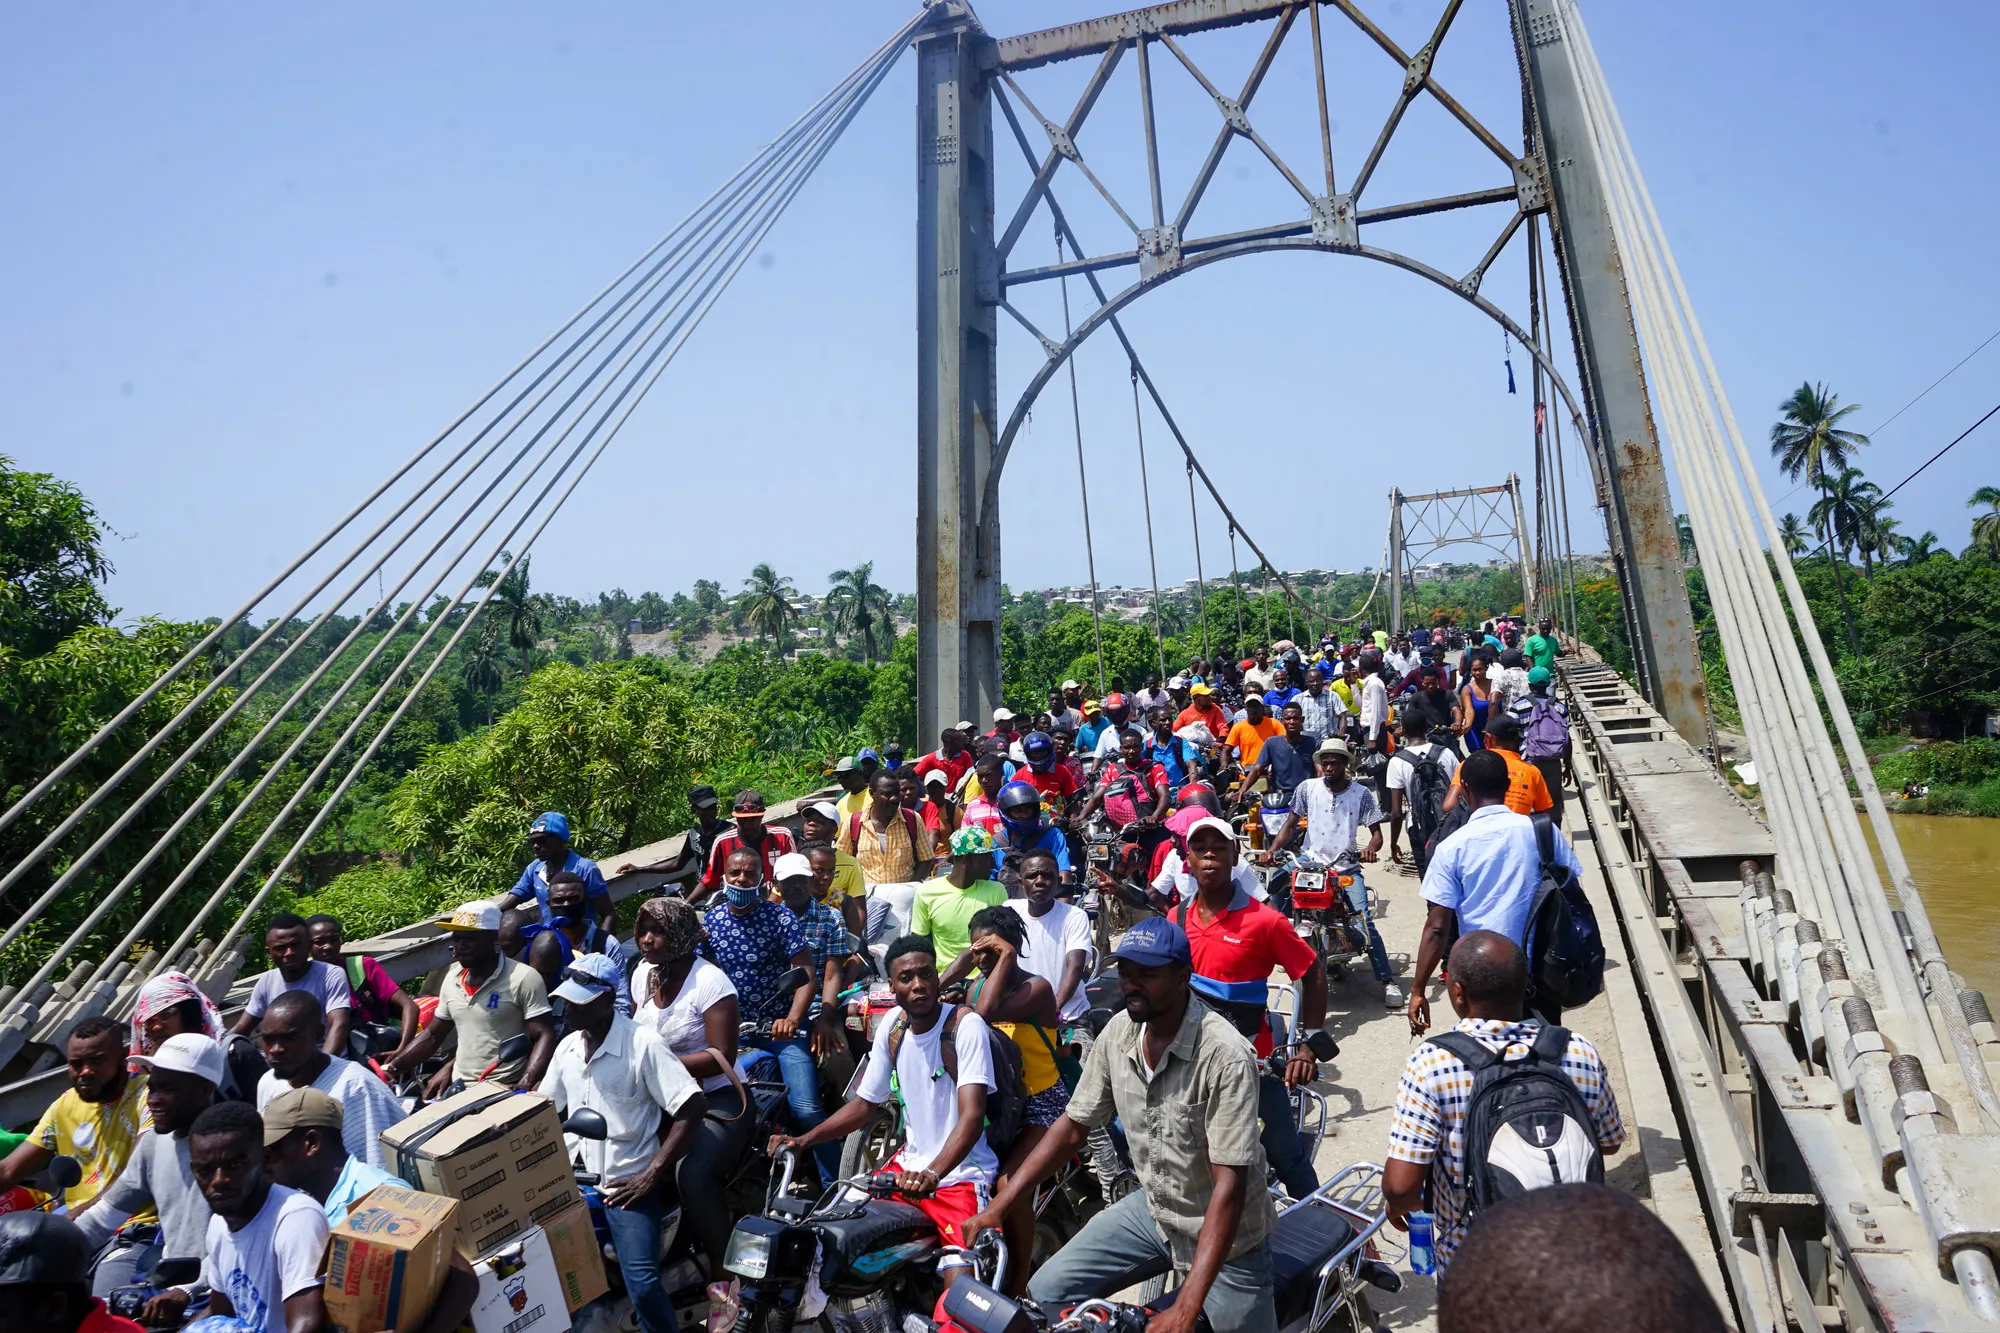 People photographed on and near the Dumarsais Estime bridge, where pedestrians and some smaller vehicles can pass, but not truck, in late August, 2021, after a 7.2 earthquake wrecked havoc in Haiti. The bridge connects the town of Jèrèmie to the rest of the country's highways.